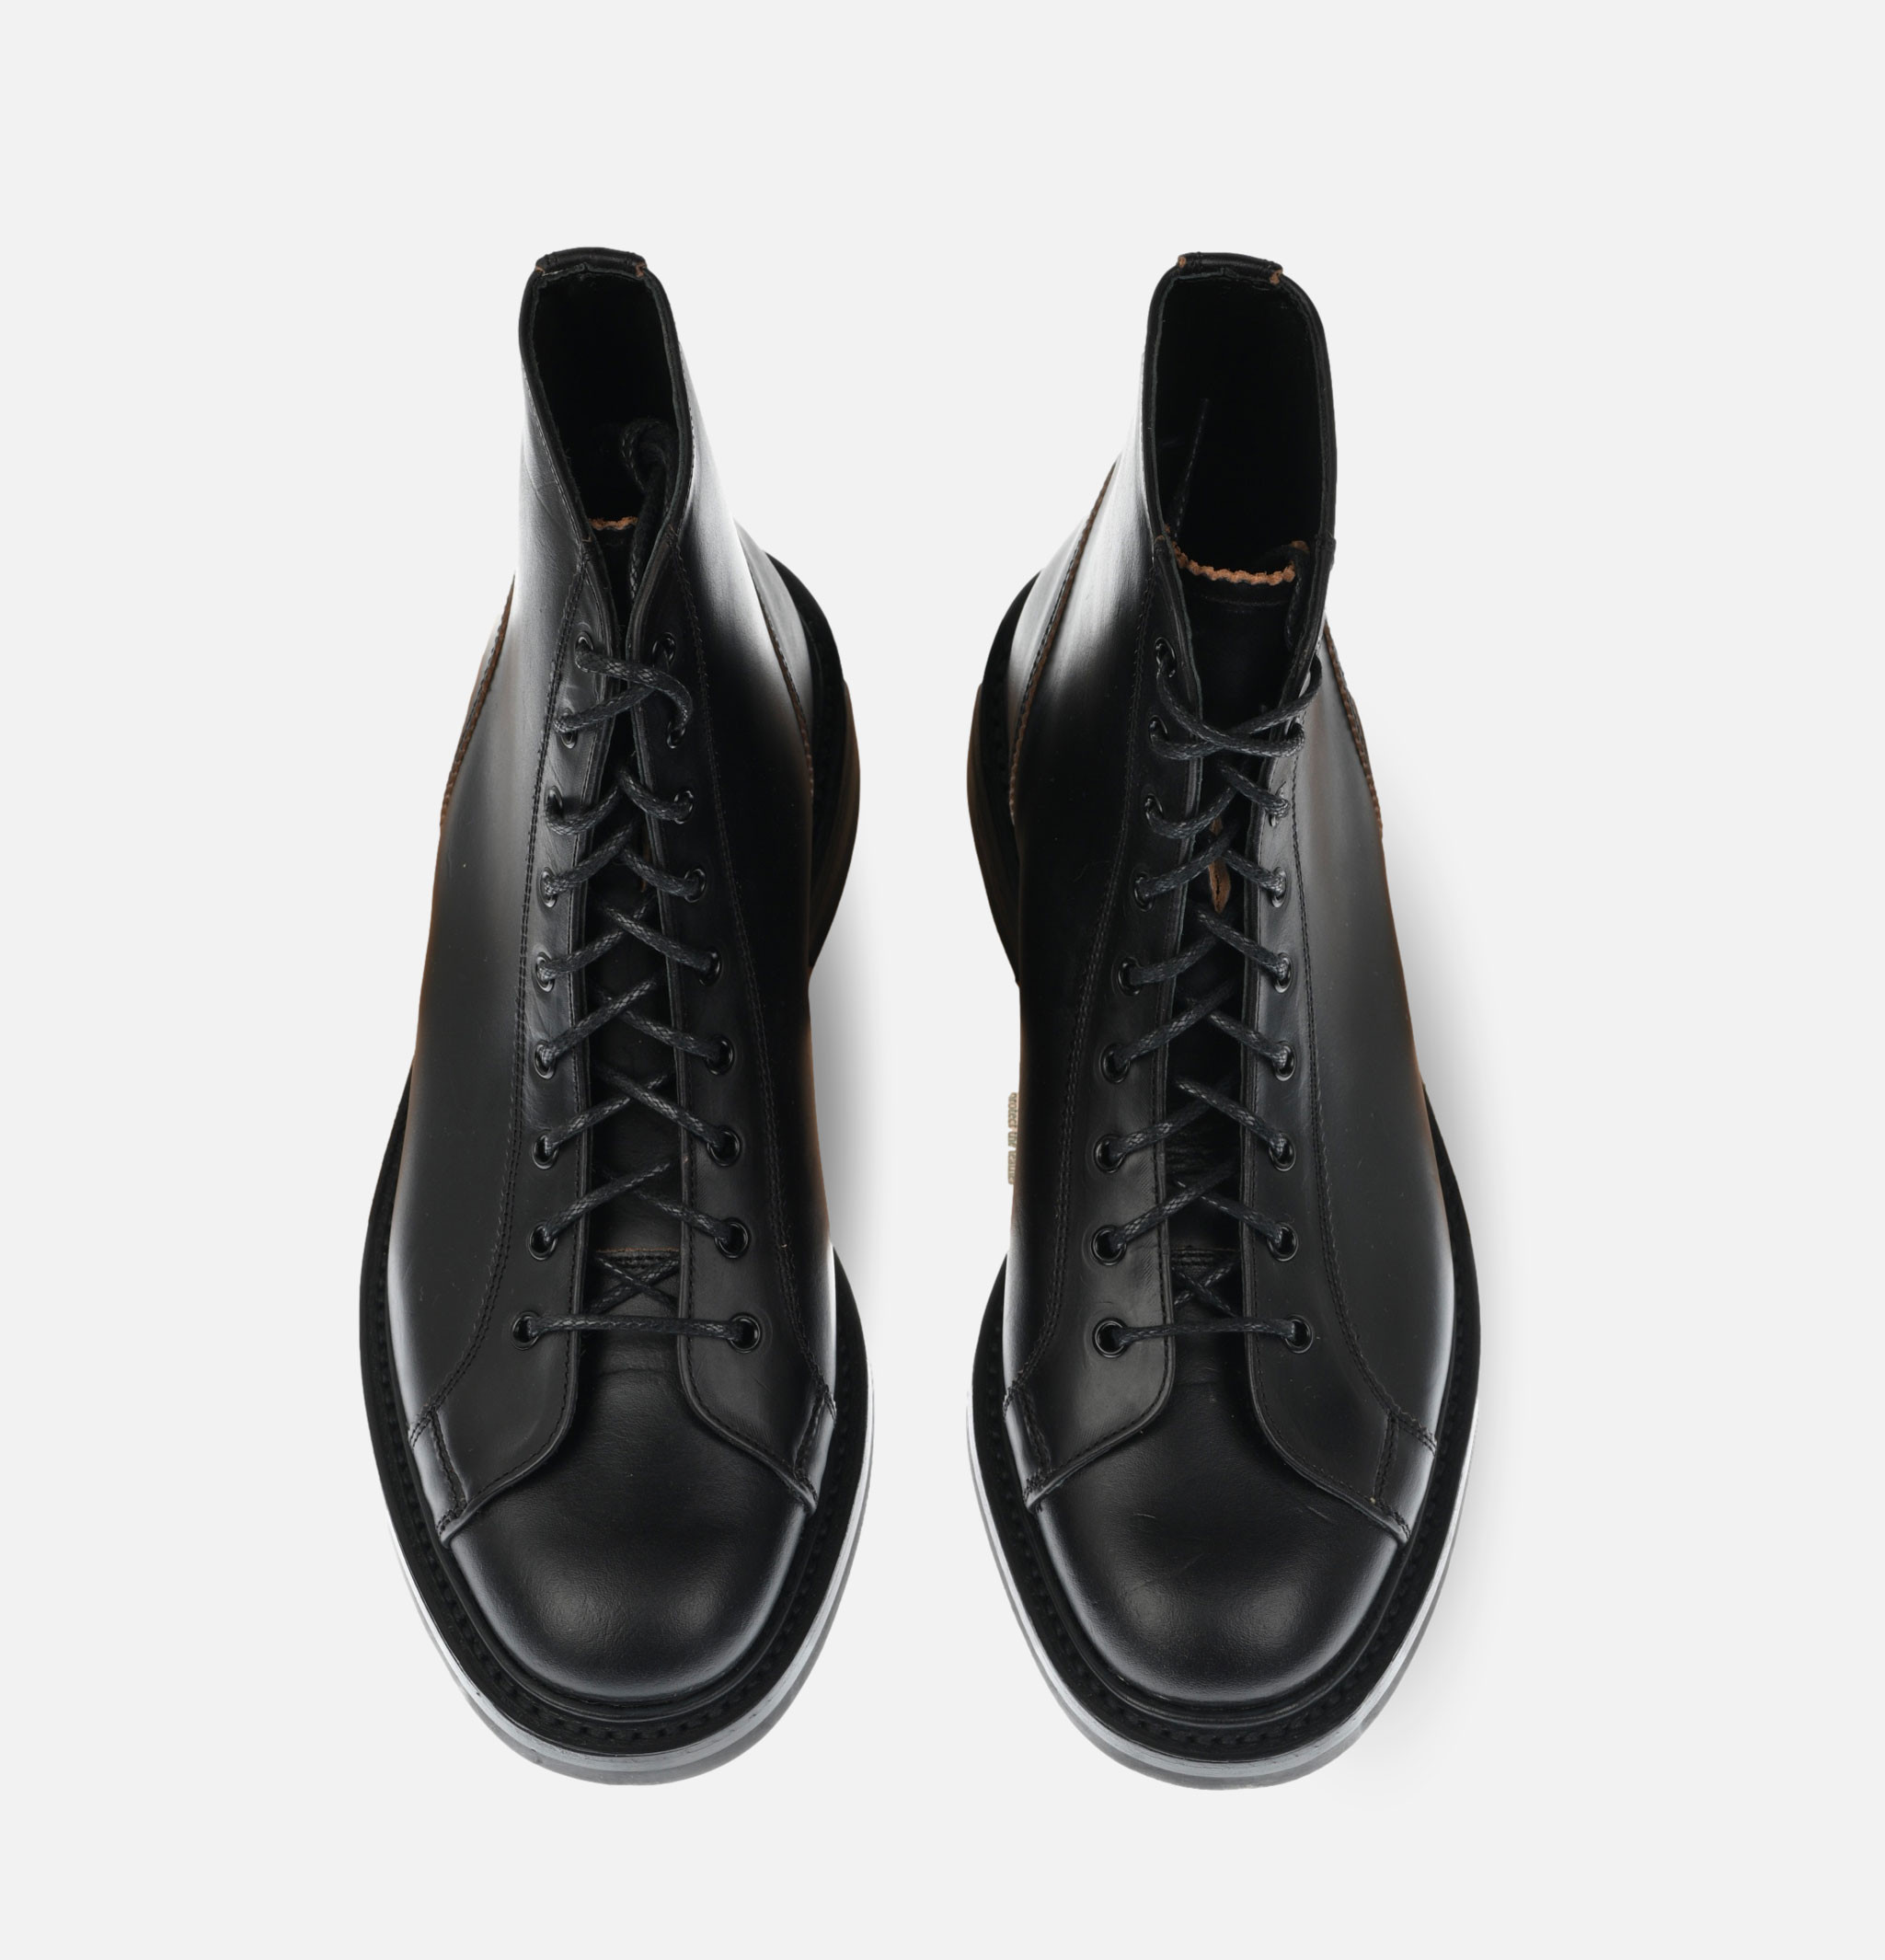 Trickers Ethan Monkey Boots Black